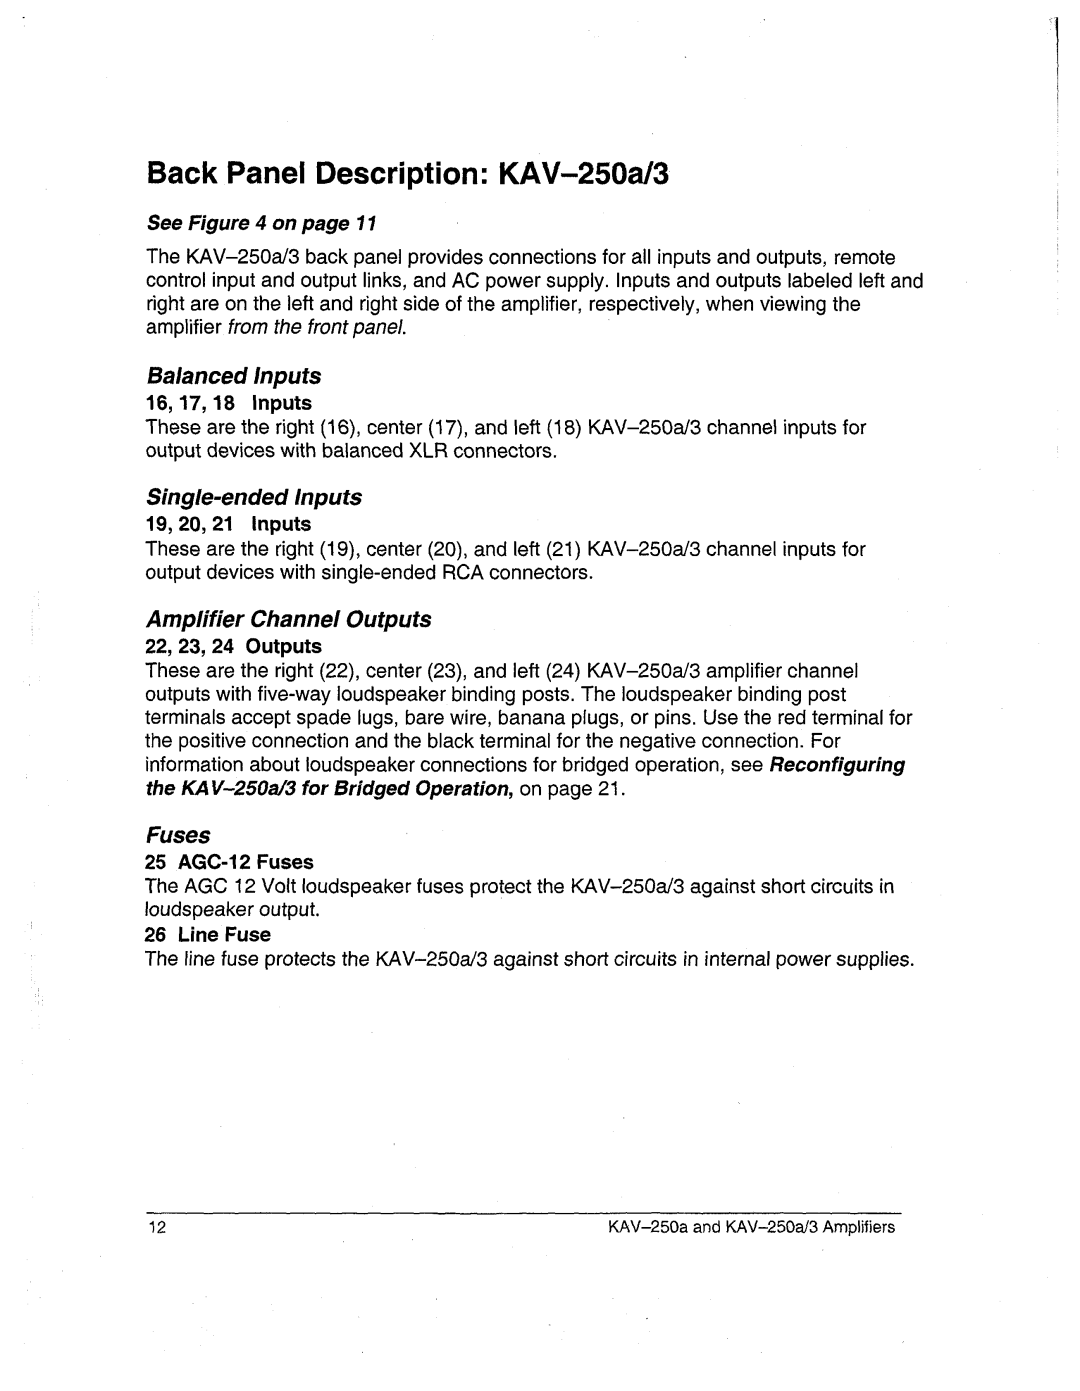 Krell Industries BackPanel Description KAV-250a/3, See on page11, Balanced Inputs, 16, 17, 18 Inputs, 19, 20, 21 Inputs 